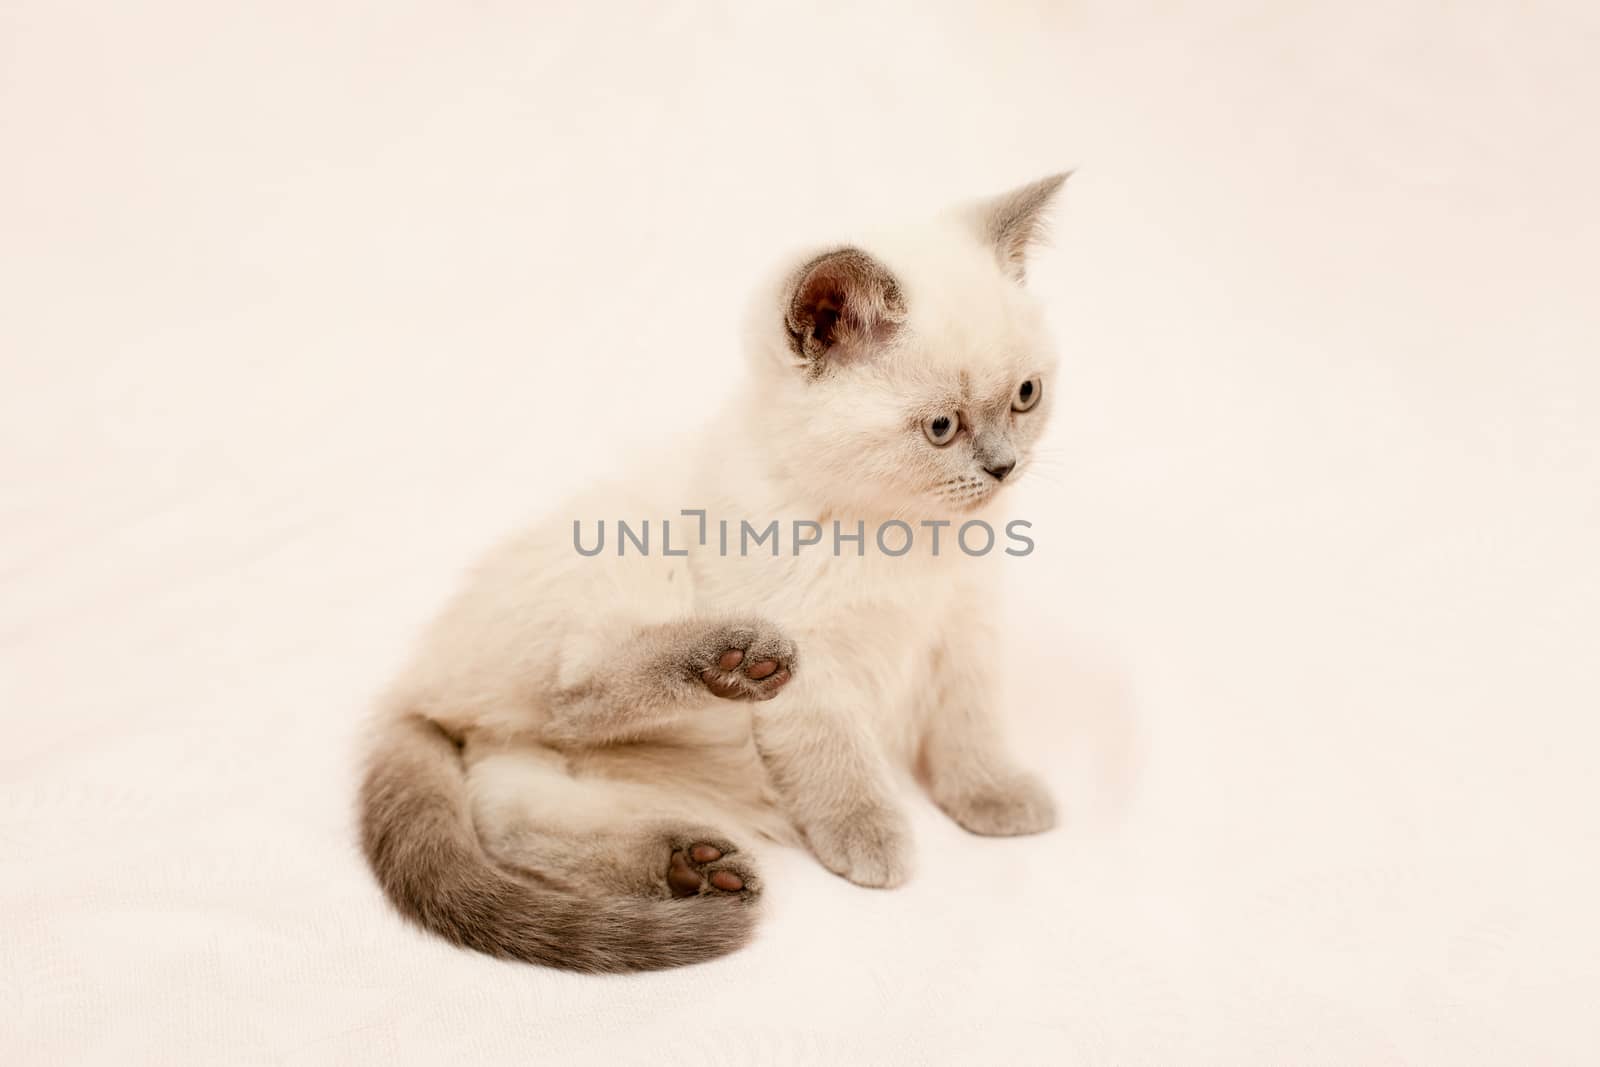 Grey and white kitten on pink background
